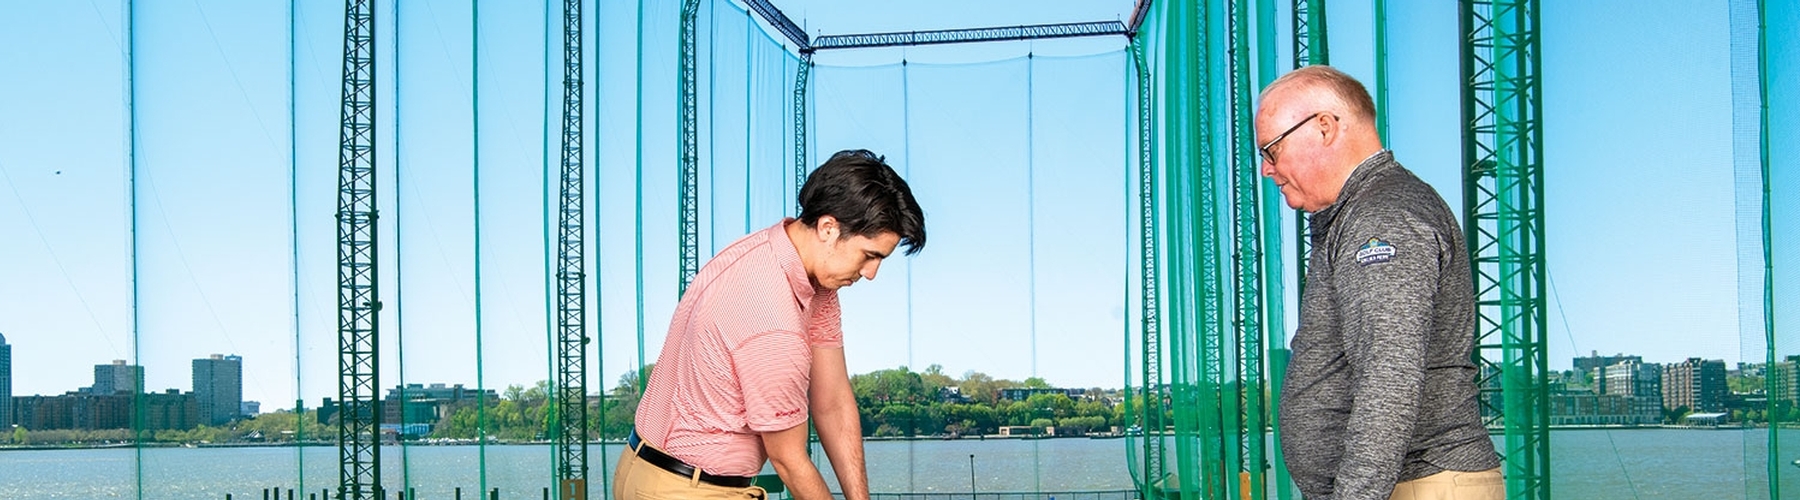 5 Tips to Improve Your Golf Game